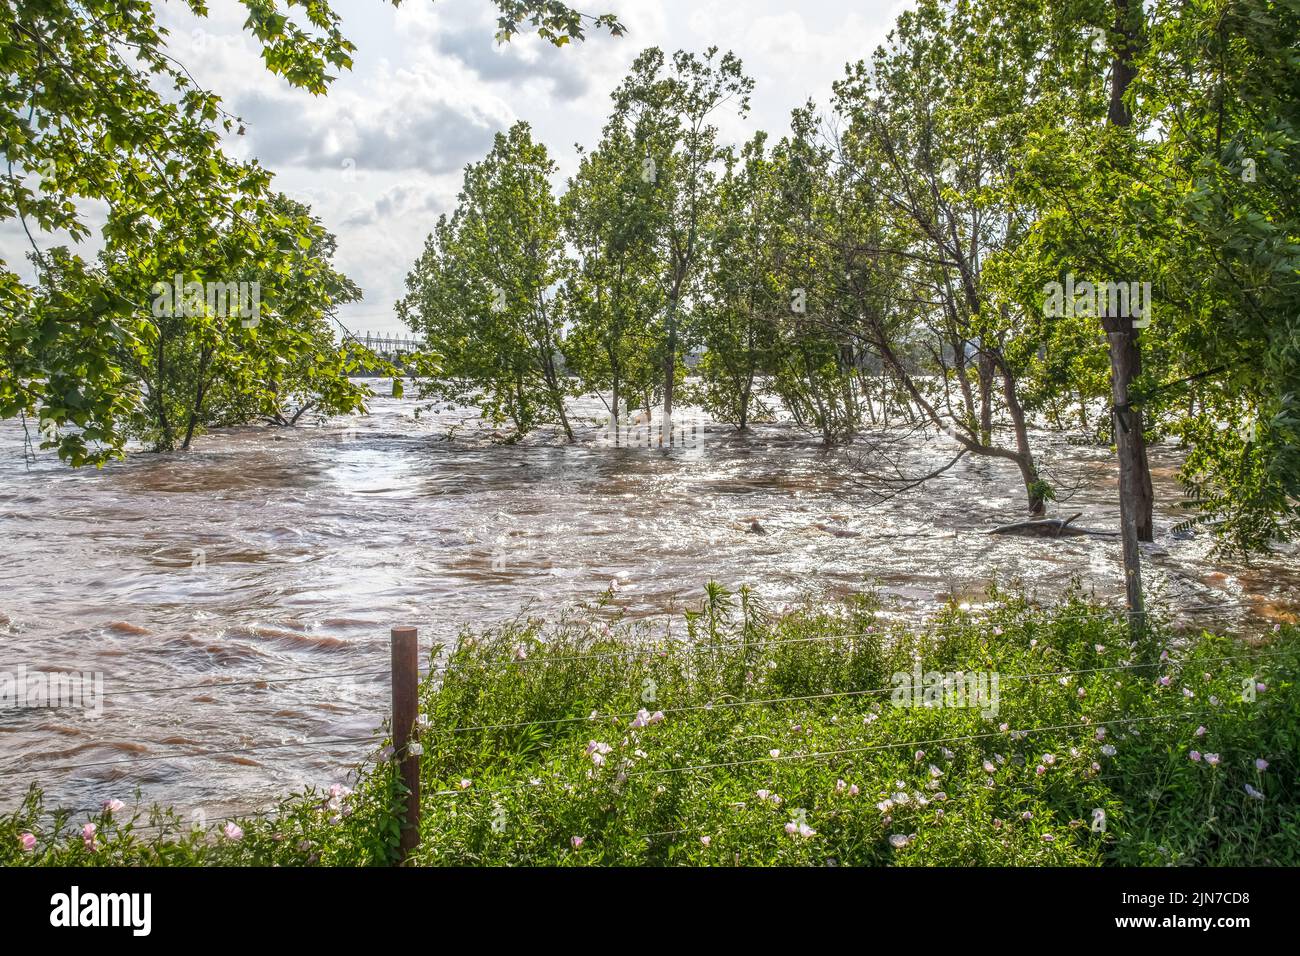 Swollen turbulent and flooded Arkansas River as it runs through Tulsa OK with trees out in water and partially submerged log - Electricity pylons acro Stock Photo